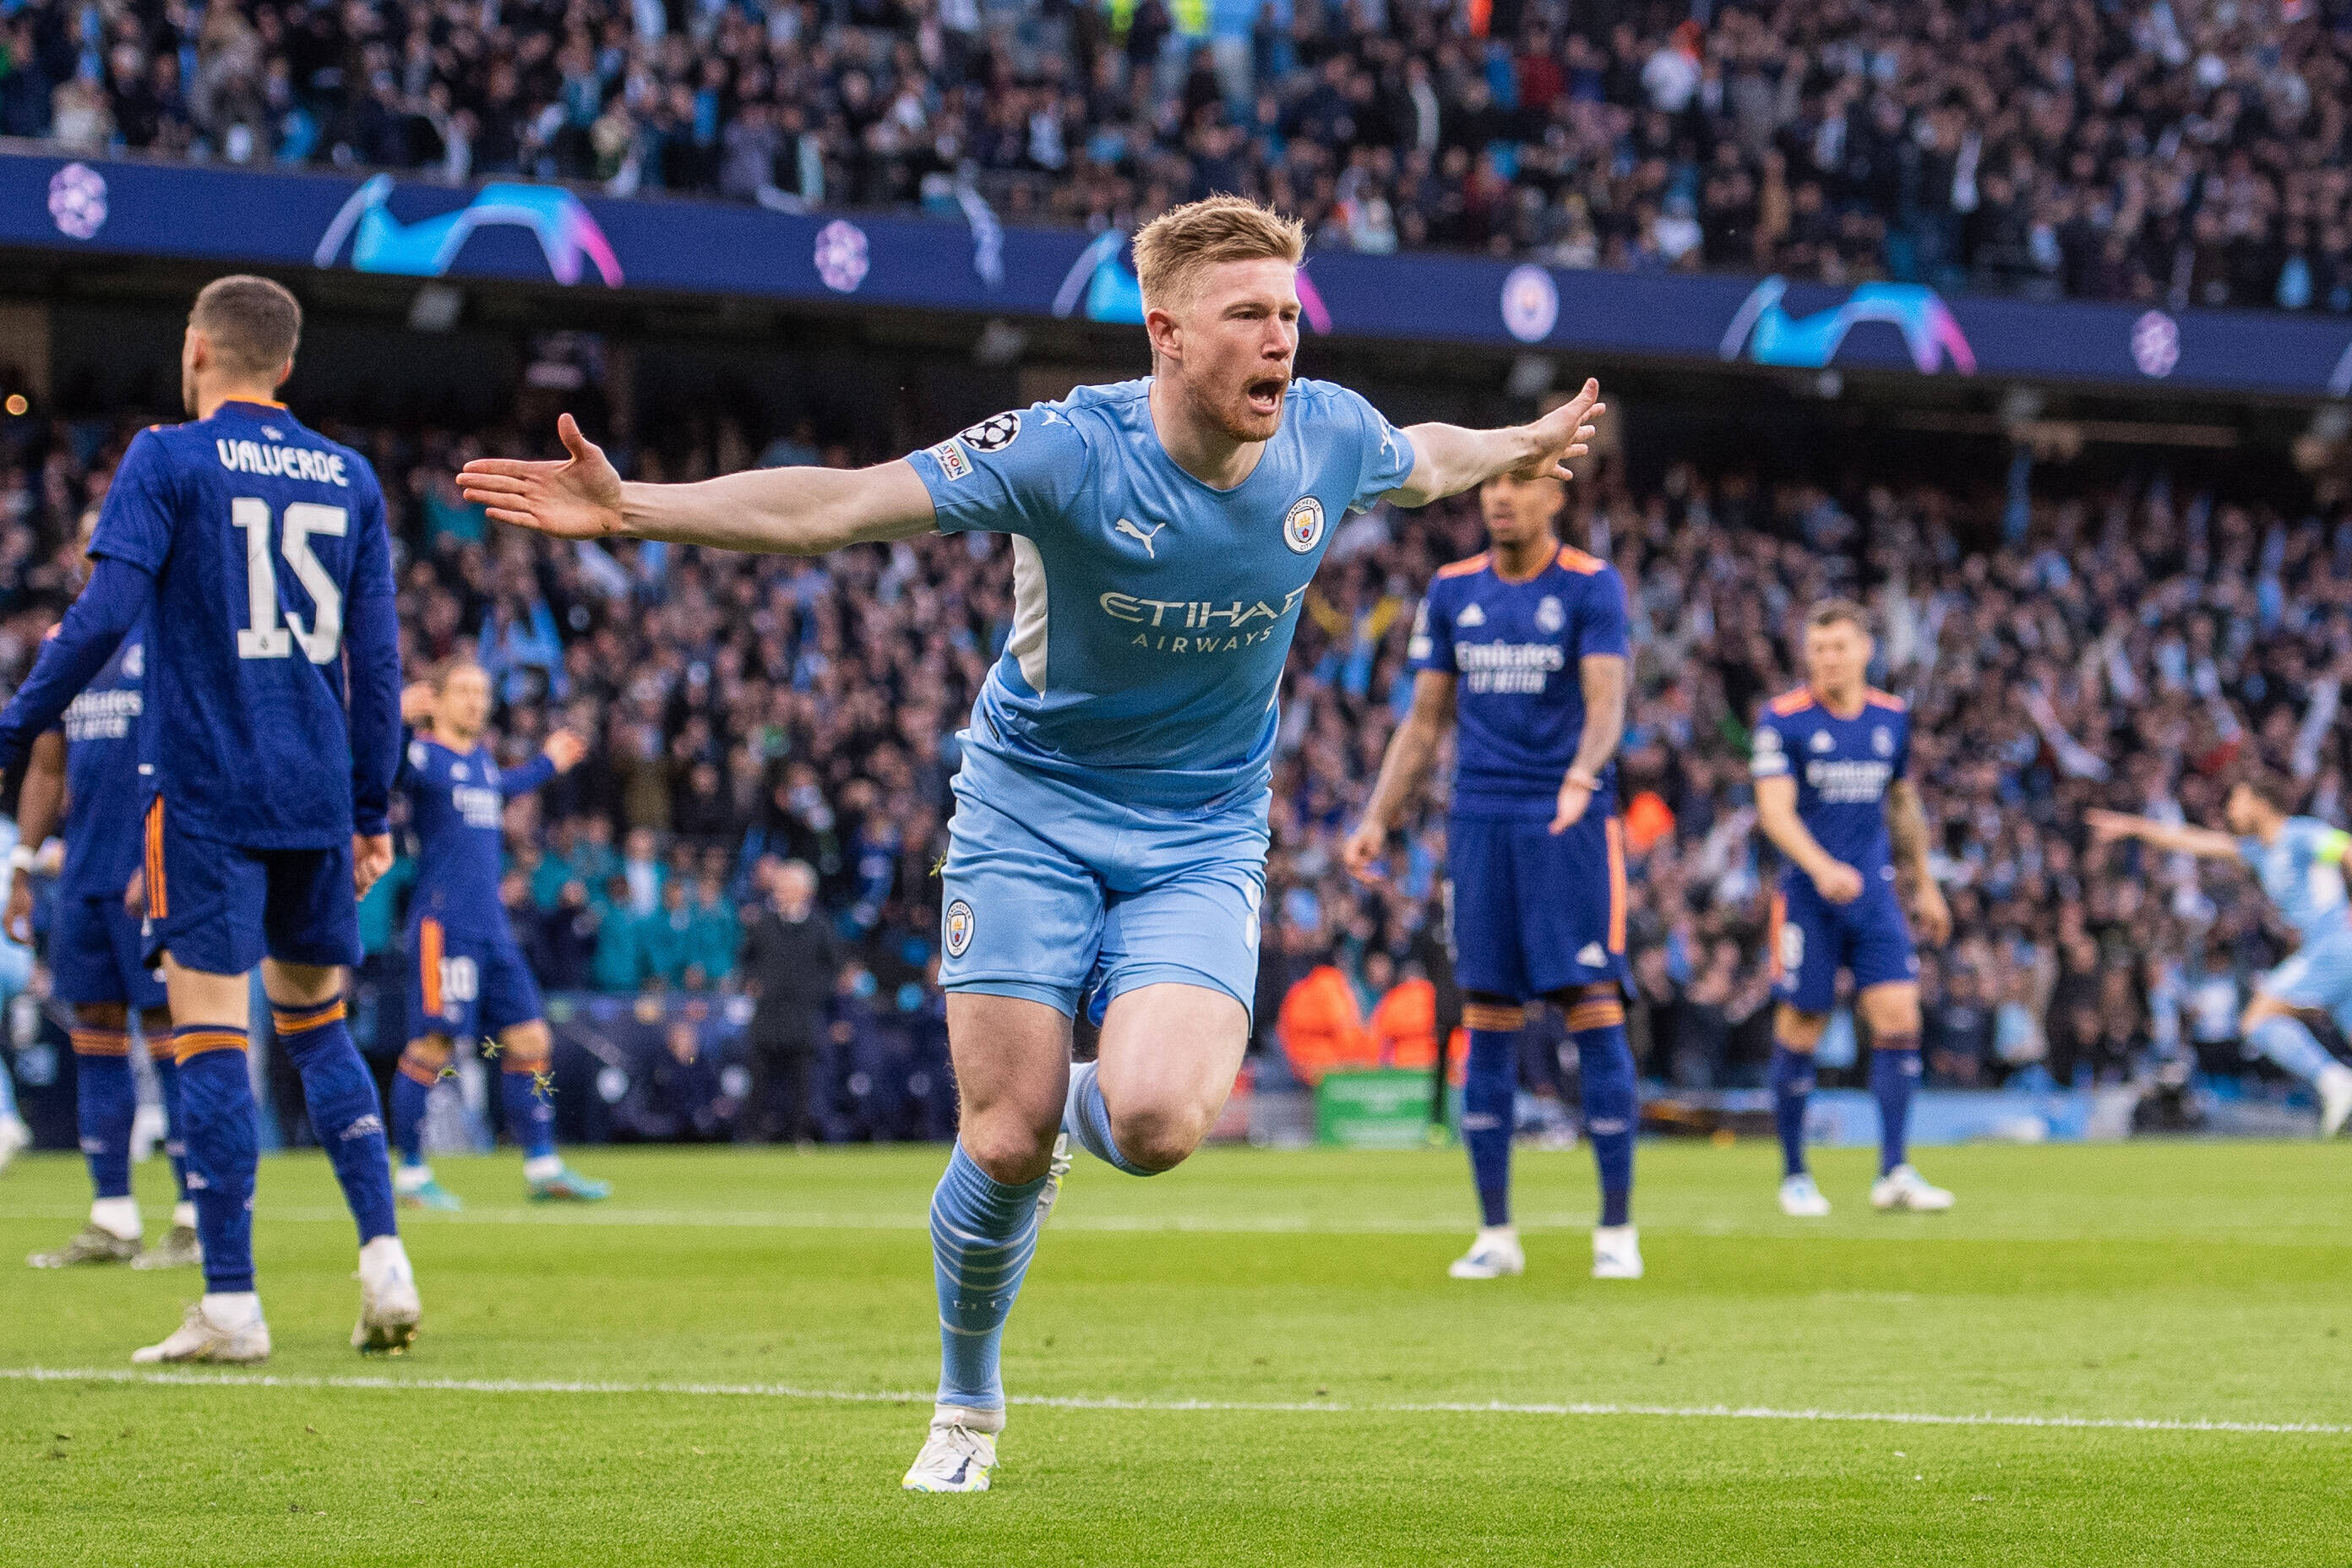 Kevin de Bruyne opened the scoring for City against Real Madrid in their Champions league first-leg clash on Tuesday night